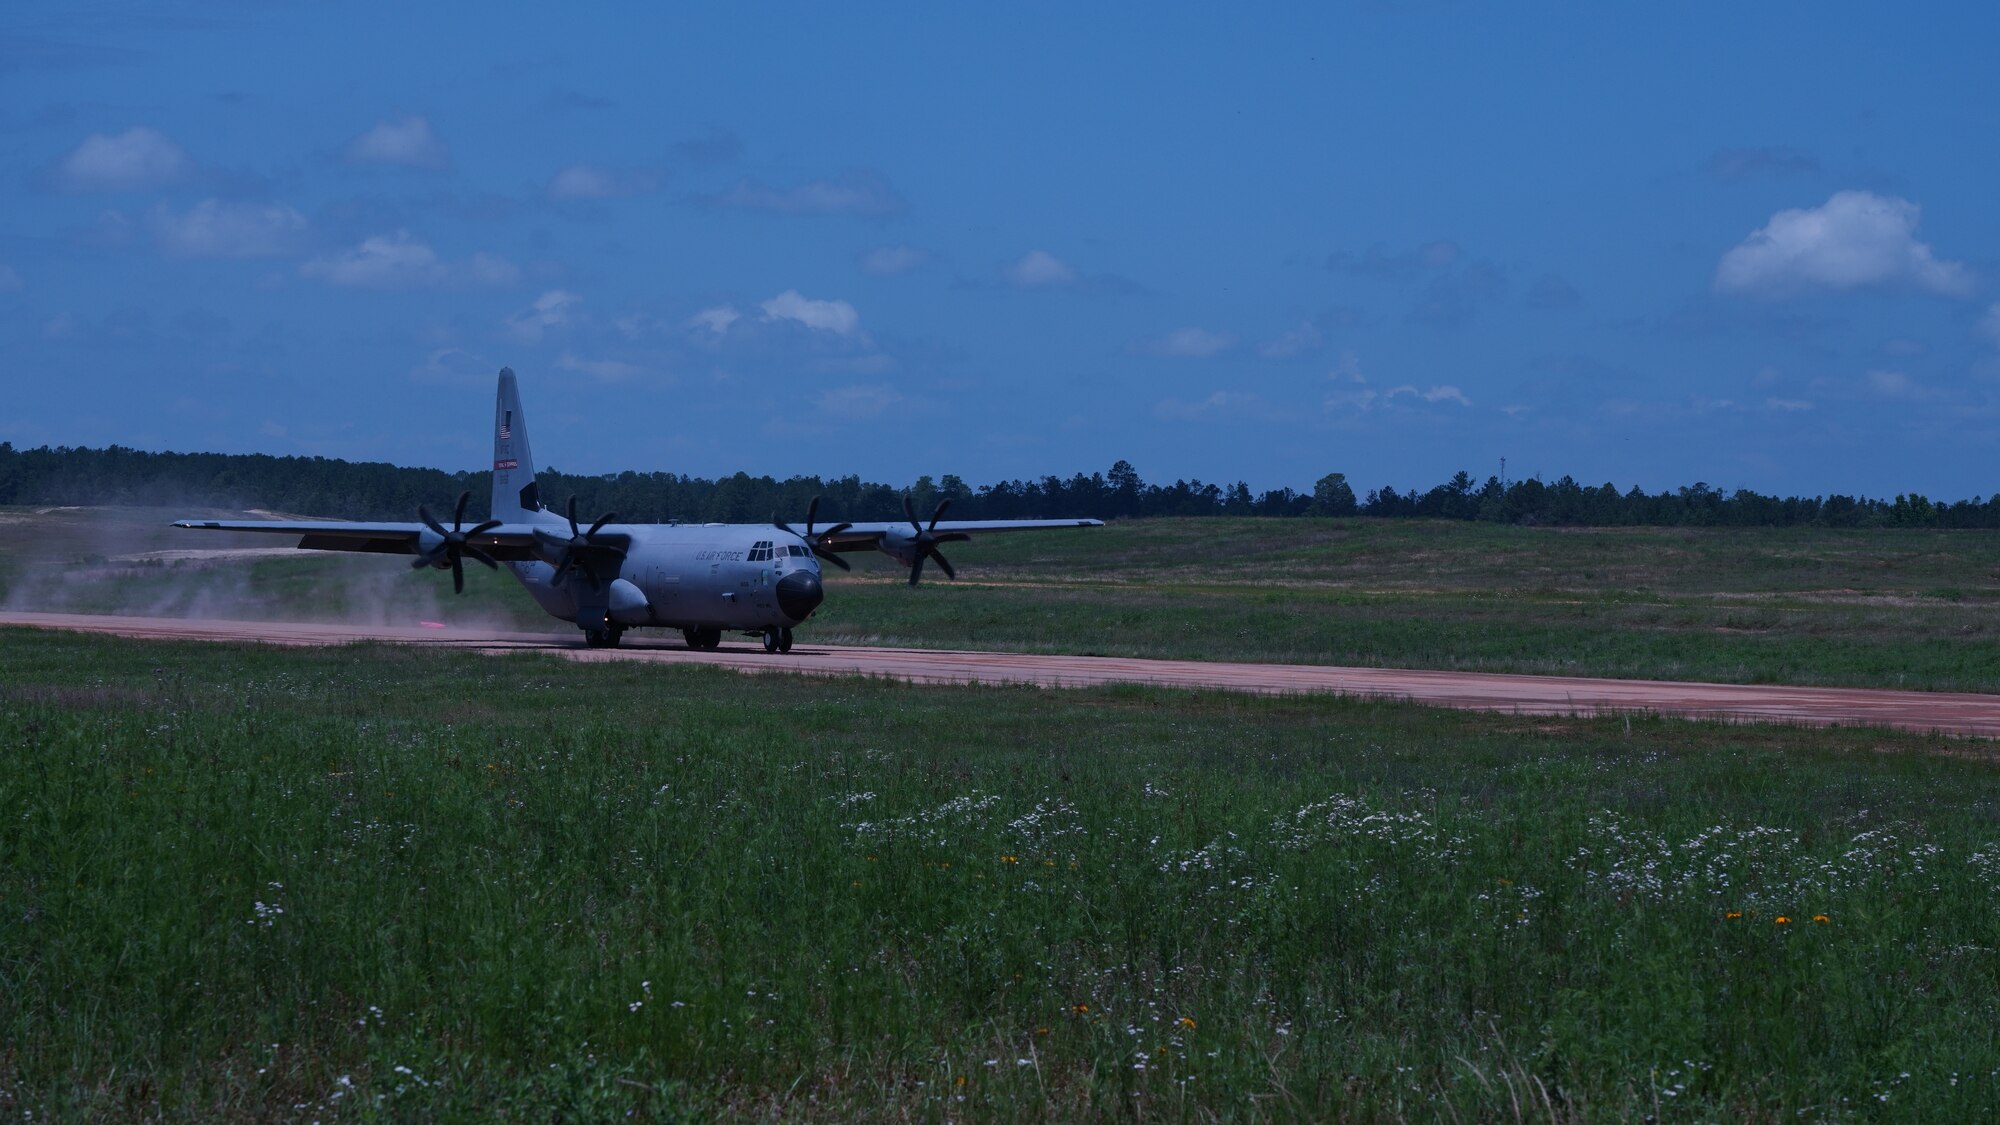 The 815th Airlift Squadron provided airlift and airdrop support during Voyager Shield, an exercise hosted by the 621st Air Mobility Advisory Group at the Joint Readiness Training Center and Fort Polk, La., May 25-27. This exercise provided the 815th AS required tactical training for the pilots and loadmasters. Pilots trained on communicating with landing and drop zone controllers, semi-prepared runway operations, and assault landings. Loadmaster specific training included rolling stock loading/unloading in both normal and engine running operations, patient loading with engines running and personnel drops. (U.S. Air Force photo by Jessica L. Kendziorek)